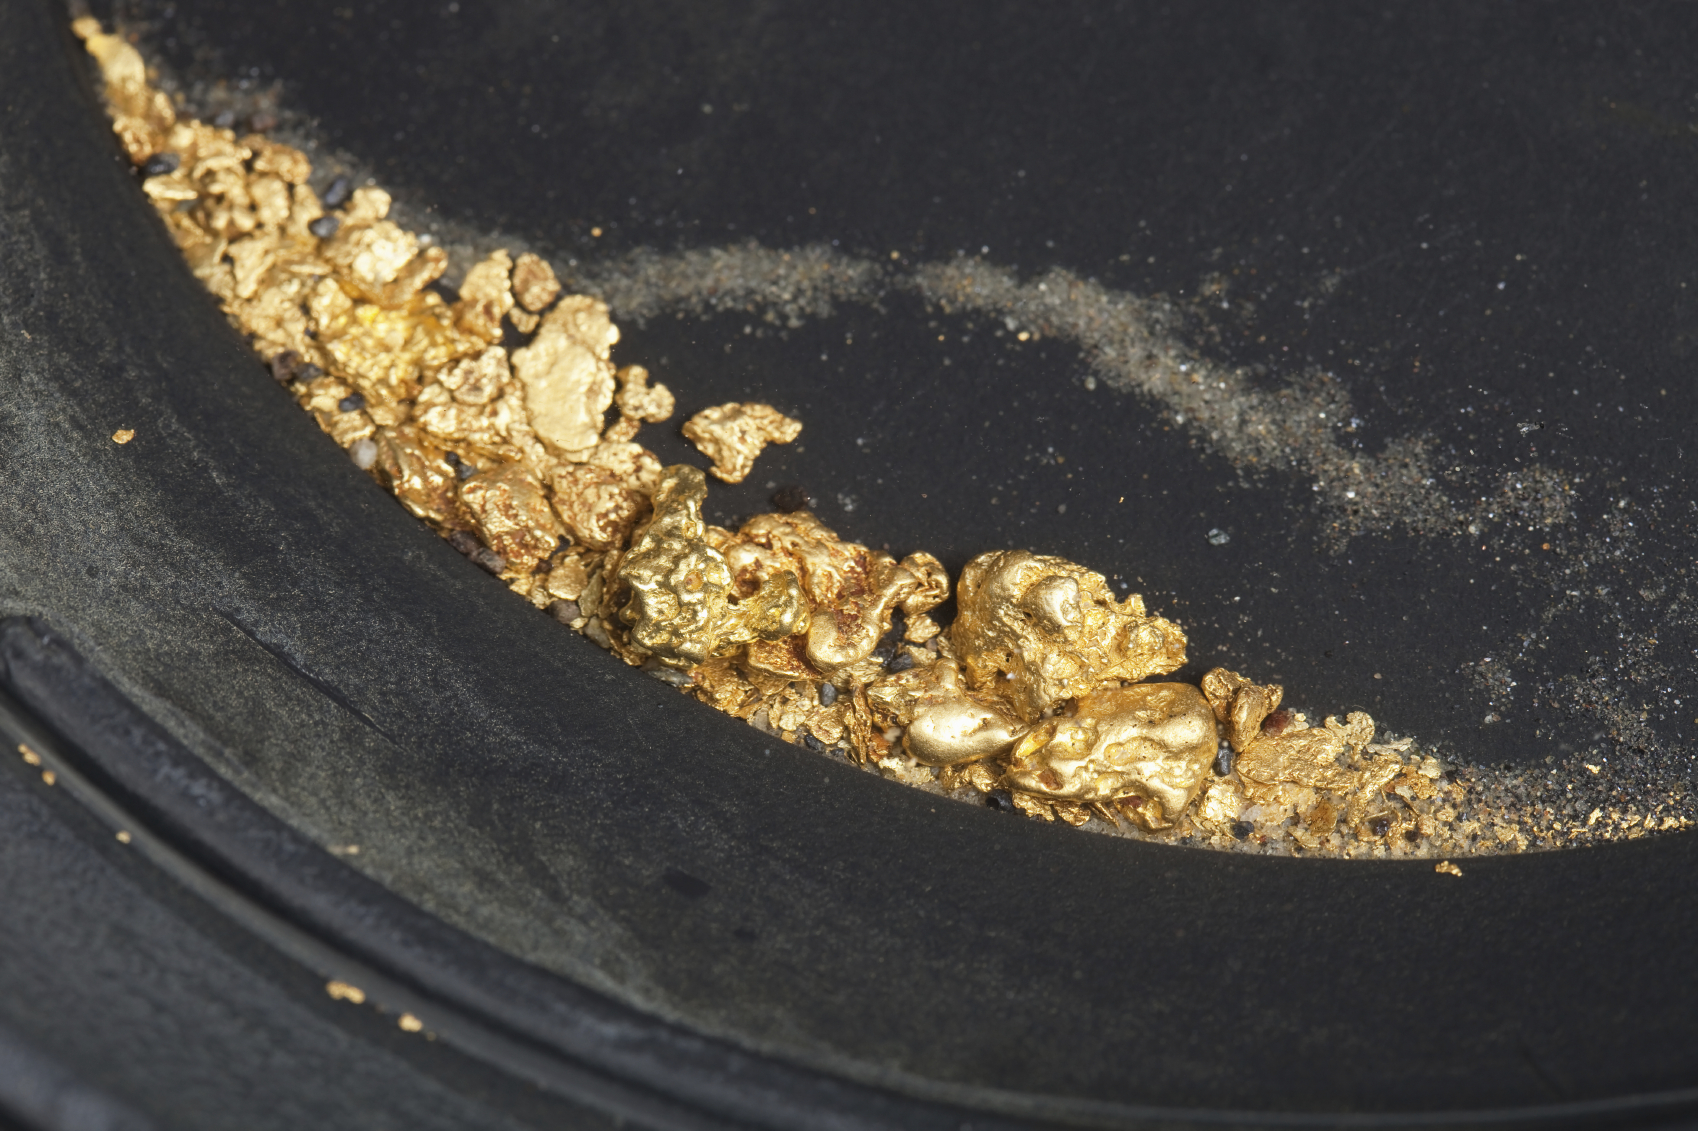 Gold at the bottom of a pan